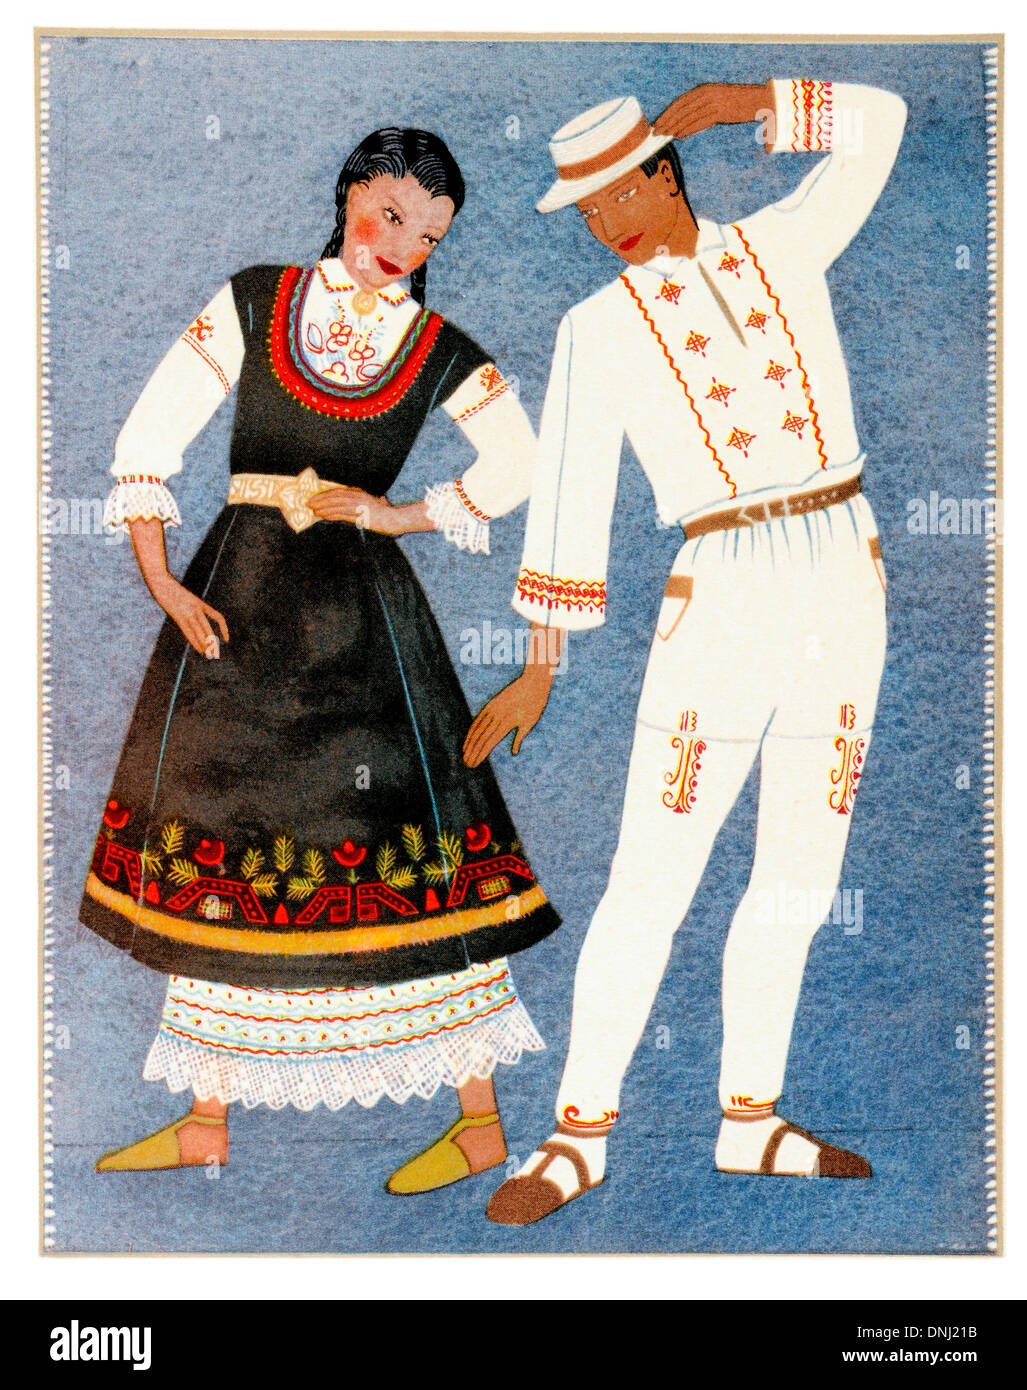 Bulgaria Traditional costume early 20th century lithograph Stock Photo